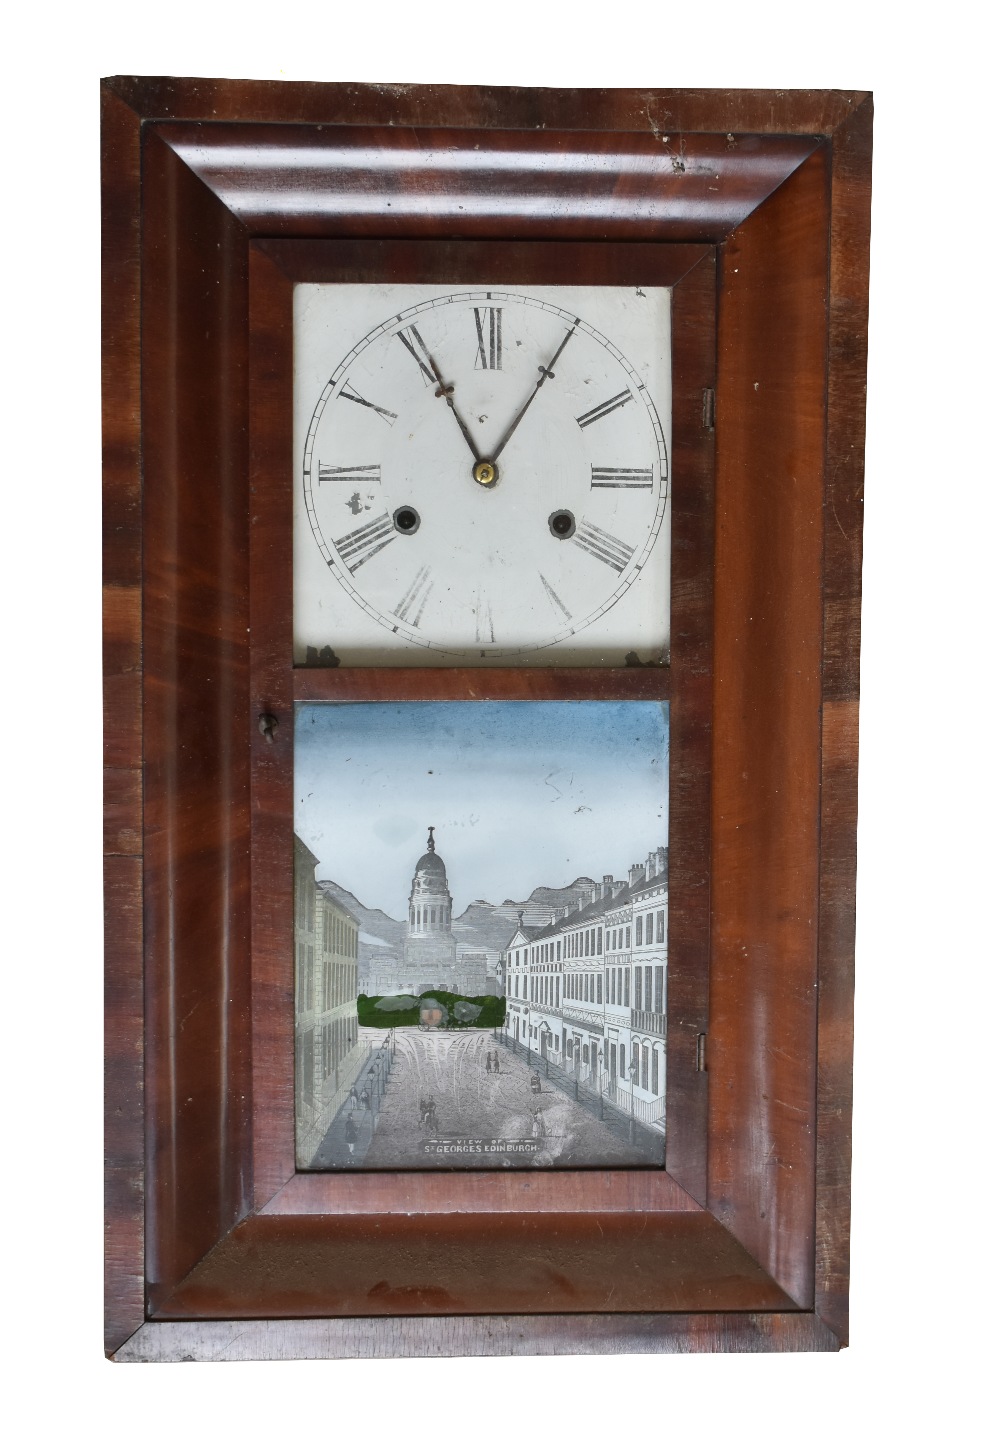 JEROME & CO OF NEW HAVEN, CONN. USA; a late 19th century American mahogany veneered ogee wall clock,